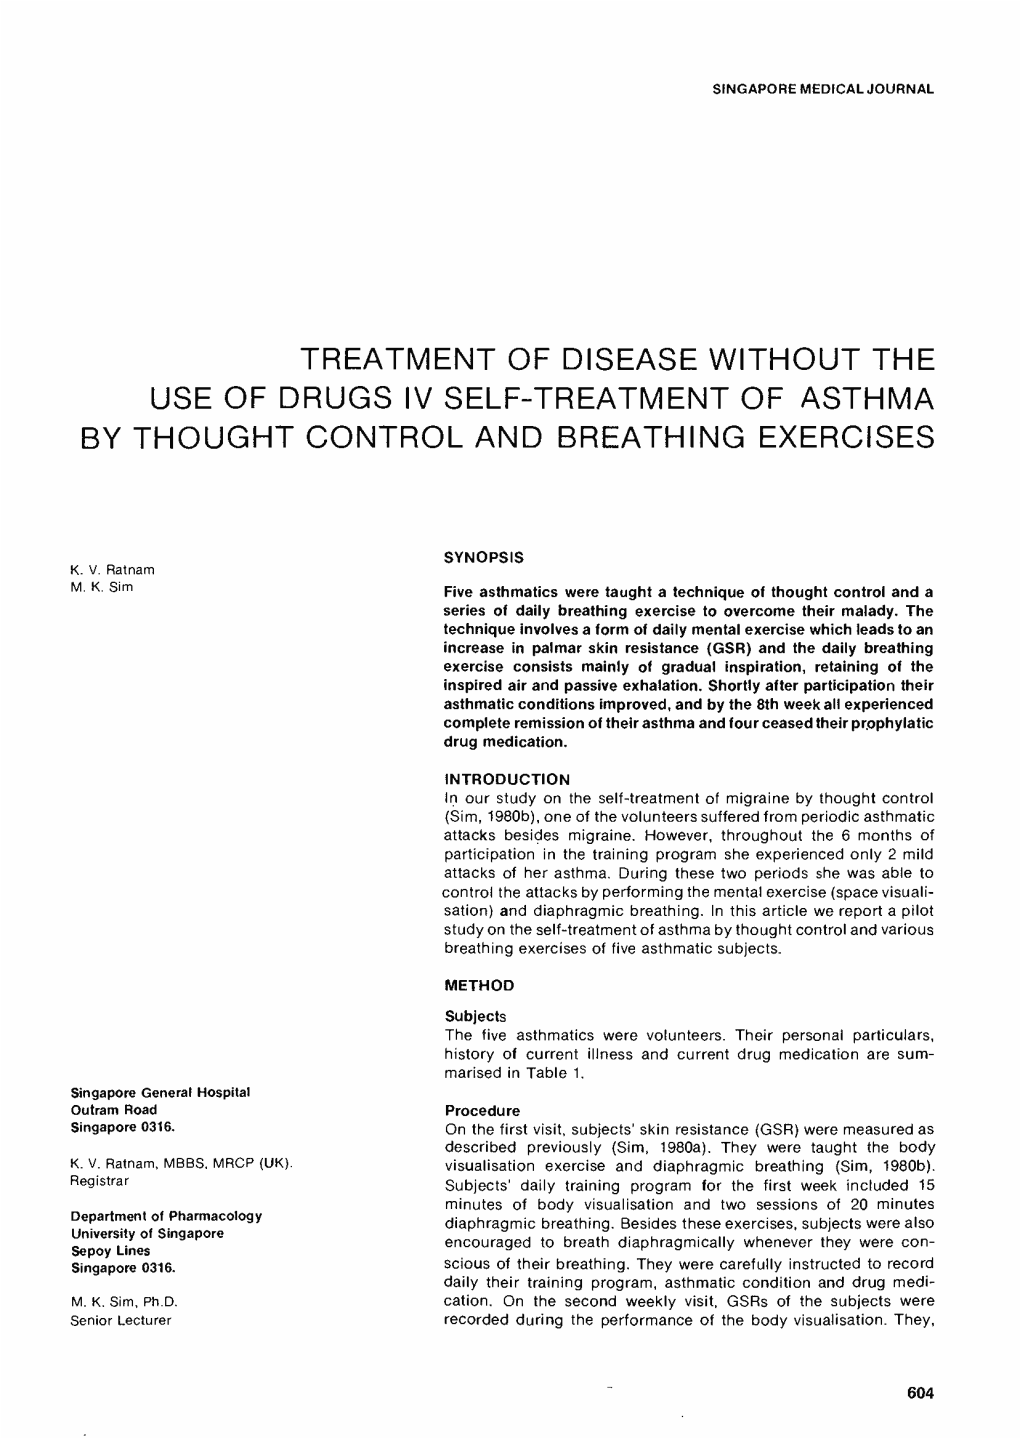 Treatment of Disease Without the Use of Drugs. IV Self-Treatment Of